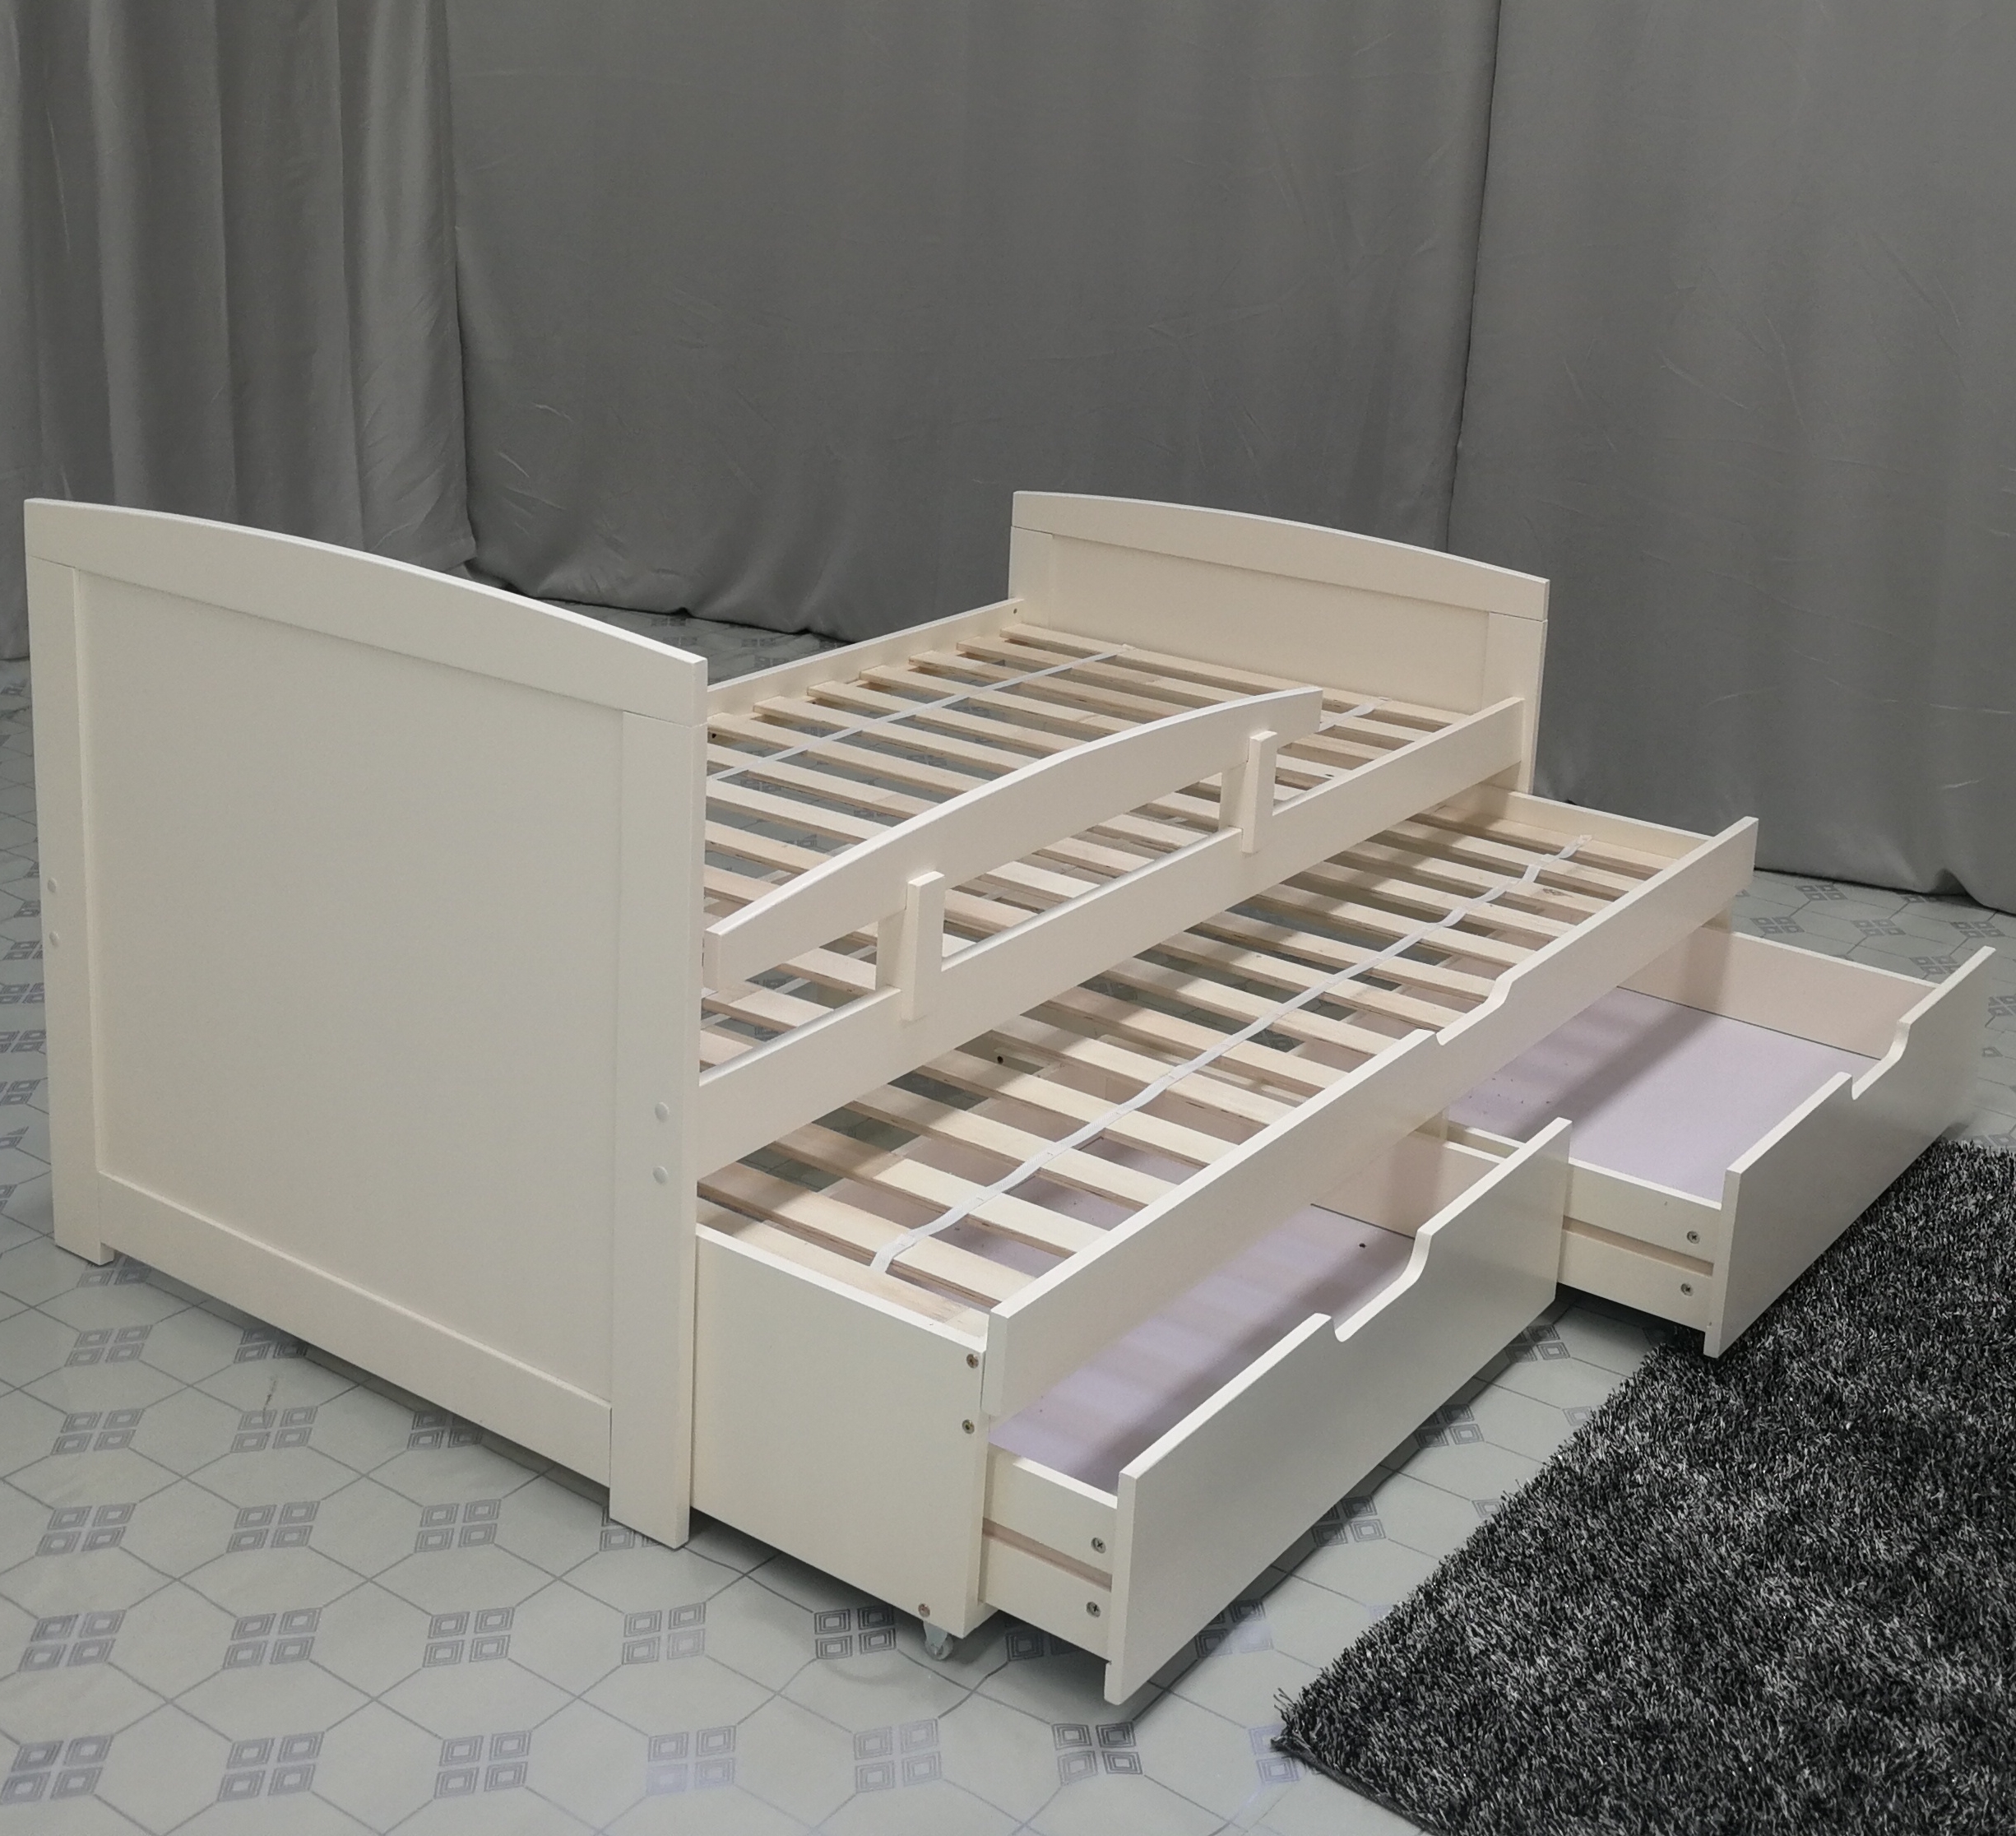 Modern Wood Twin Daybed with Drawer in White